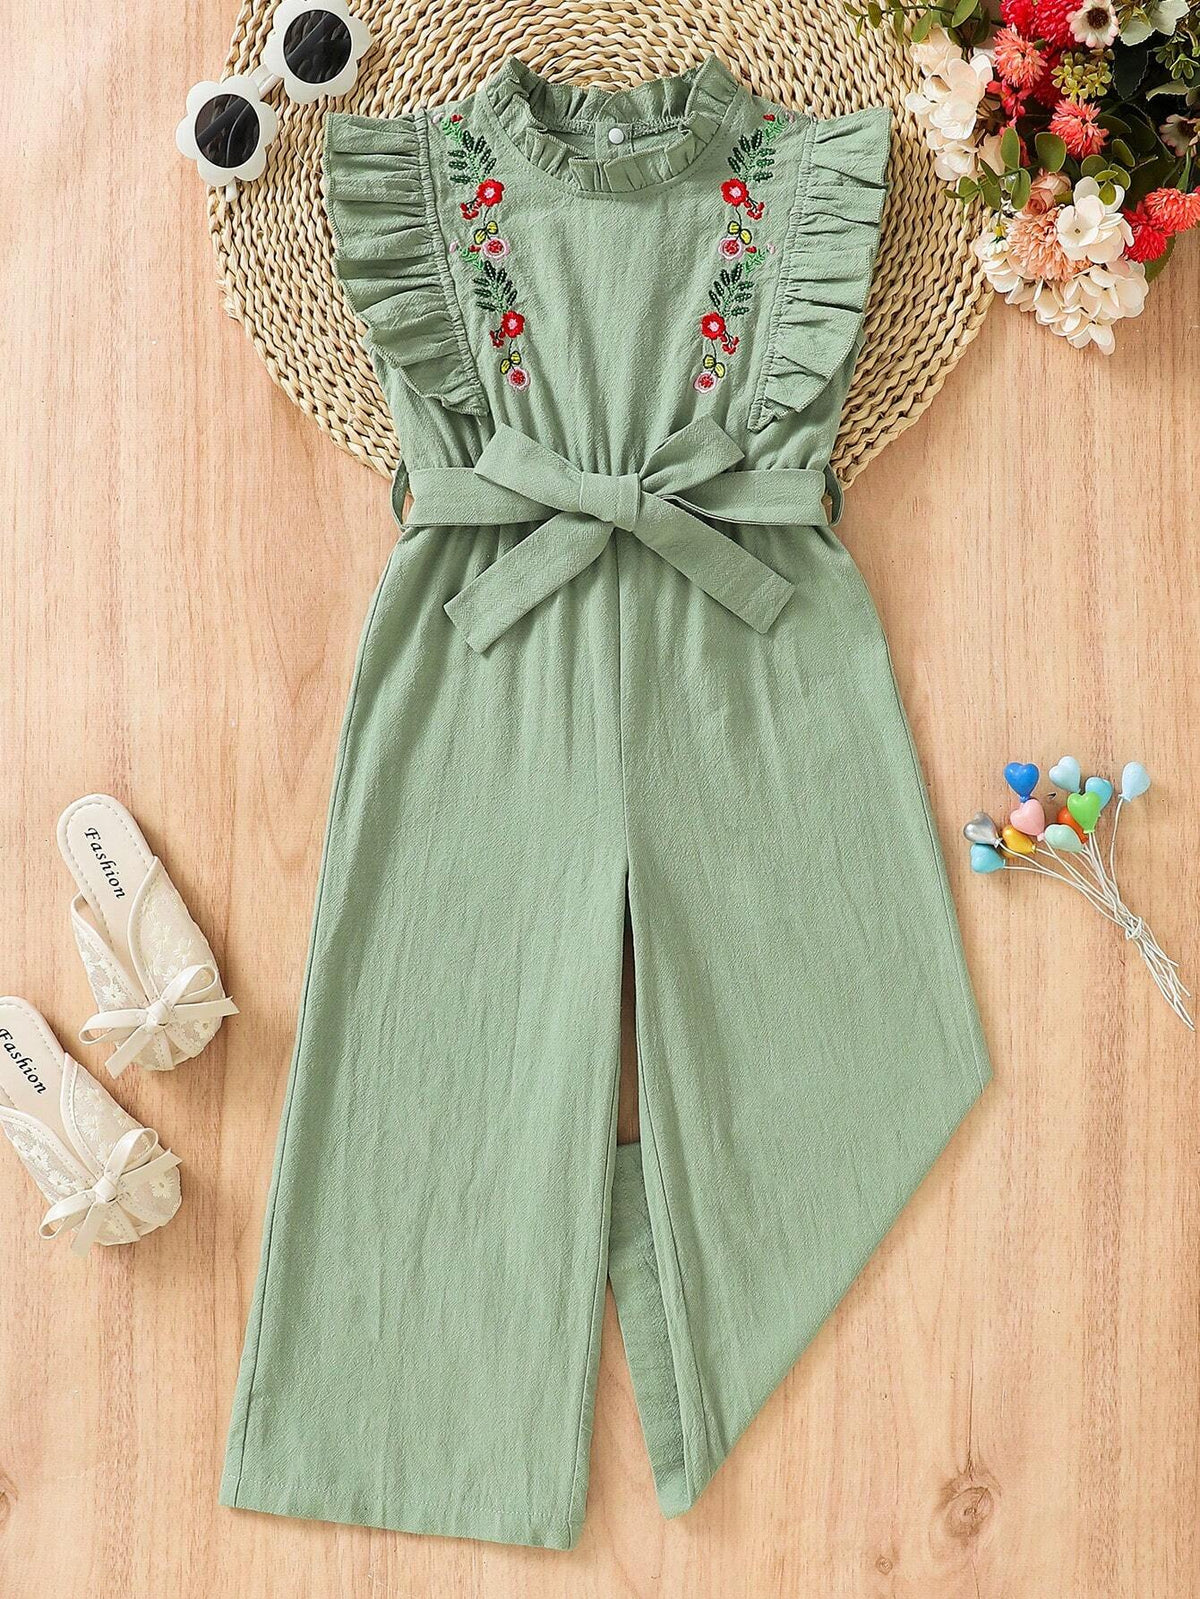 Young Girl Embroidered Floral Sweet Jumpsuit